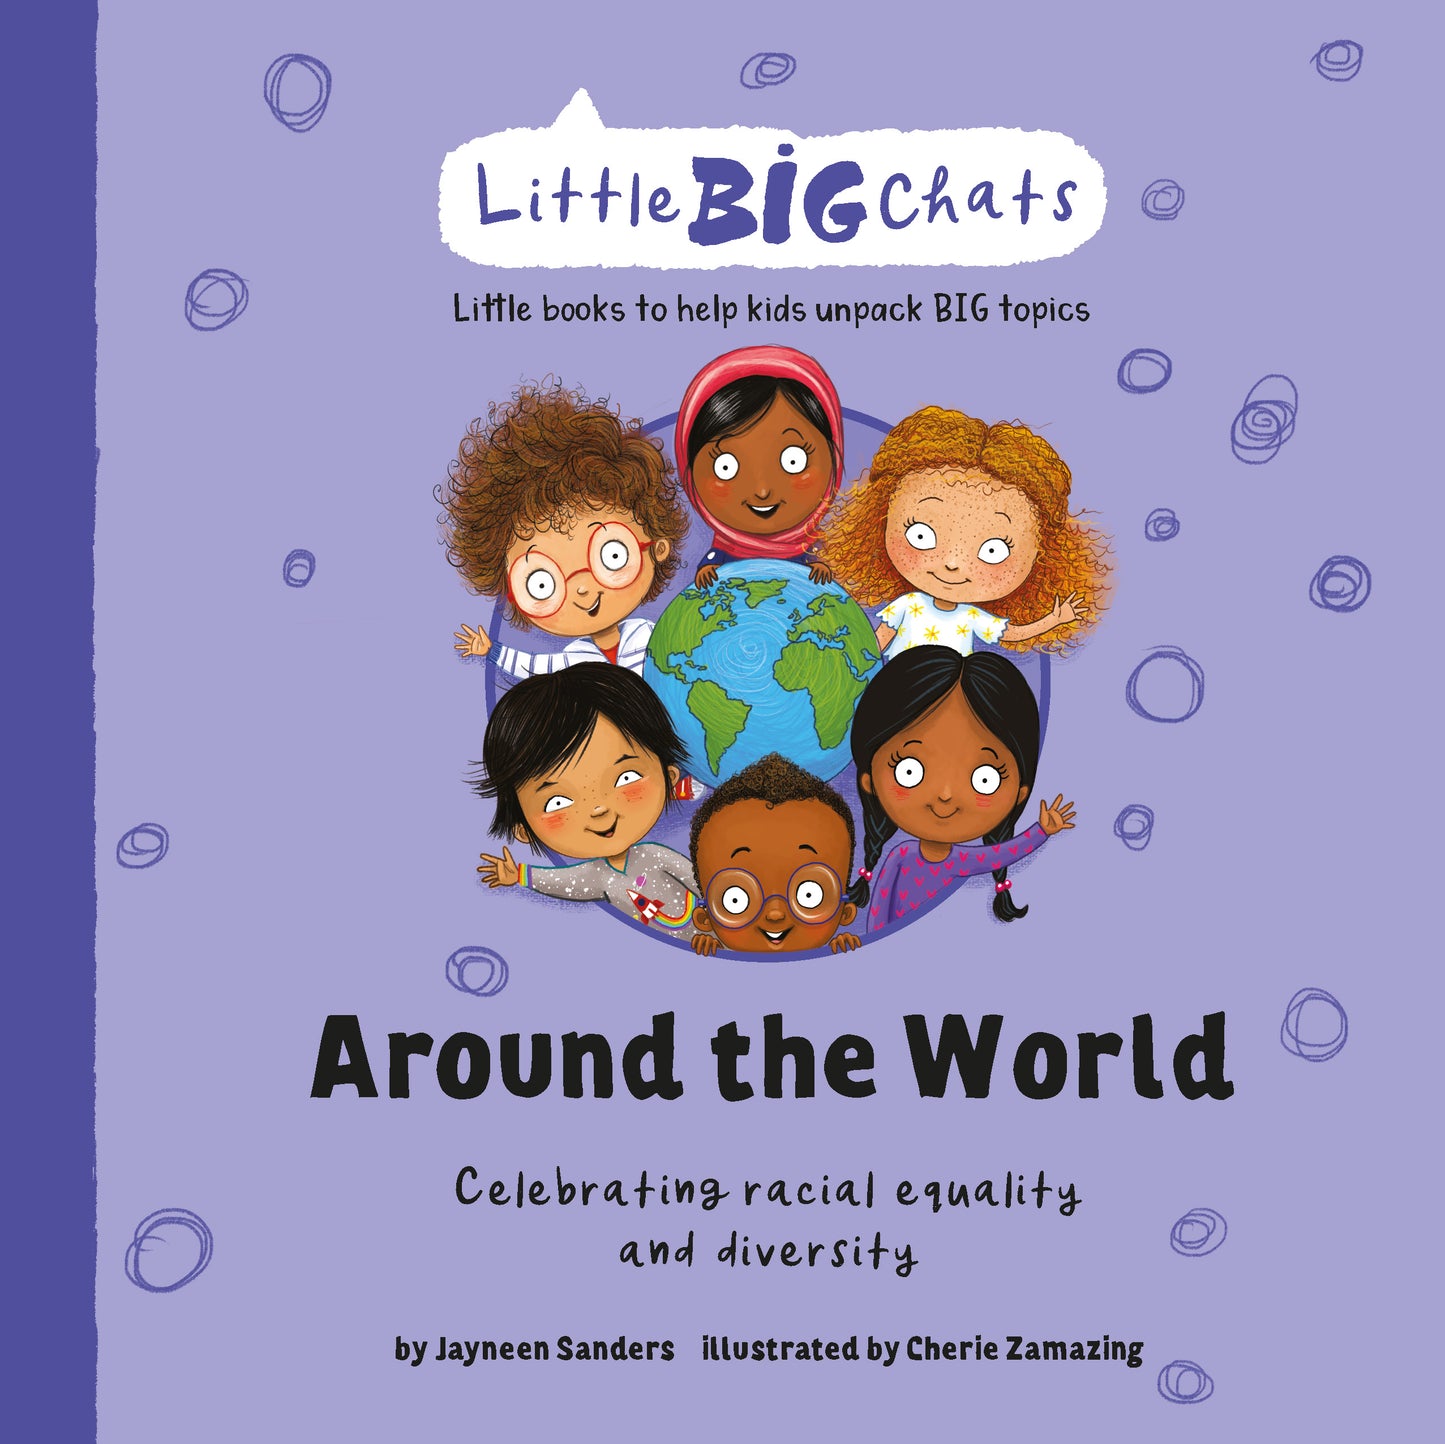 Little BIG Chats - Complete Bundle *PREORDER* (expected within 1-2 weeks)